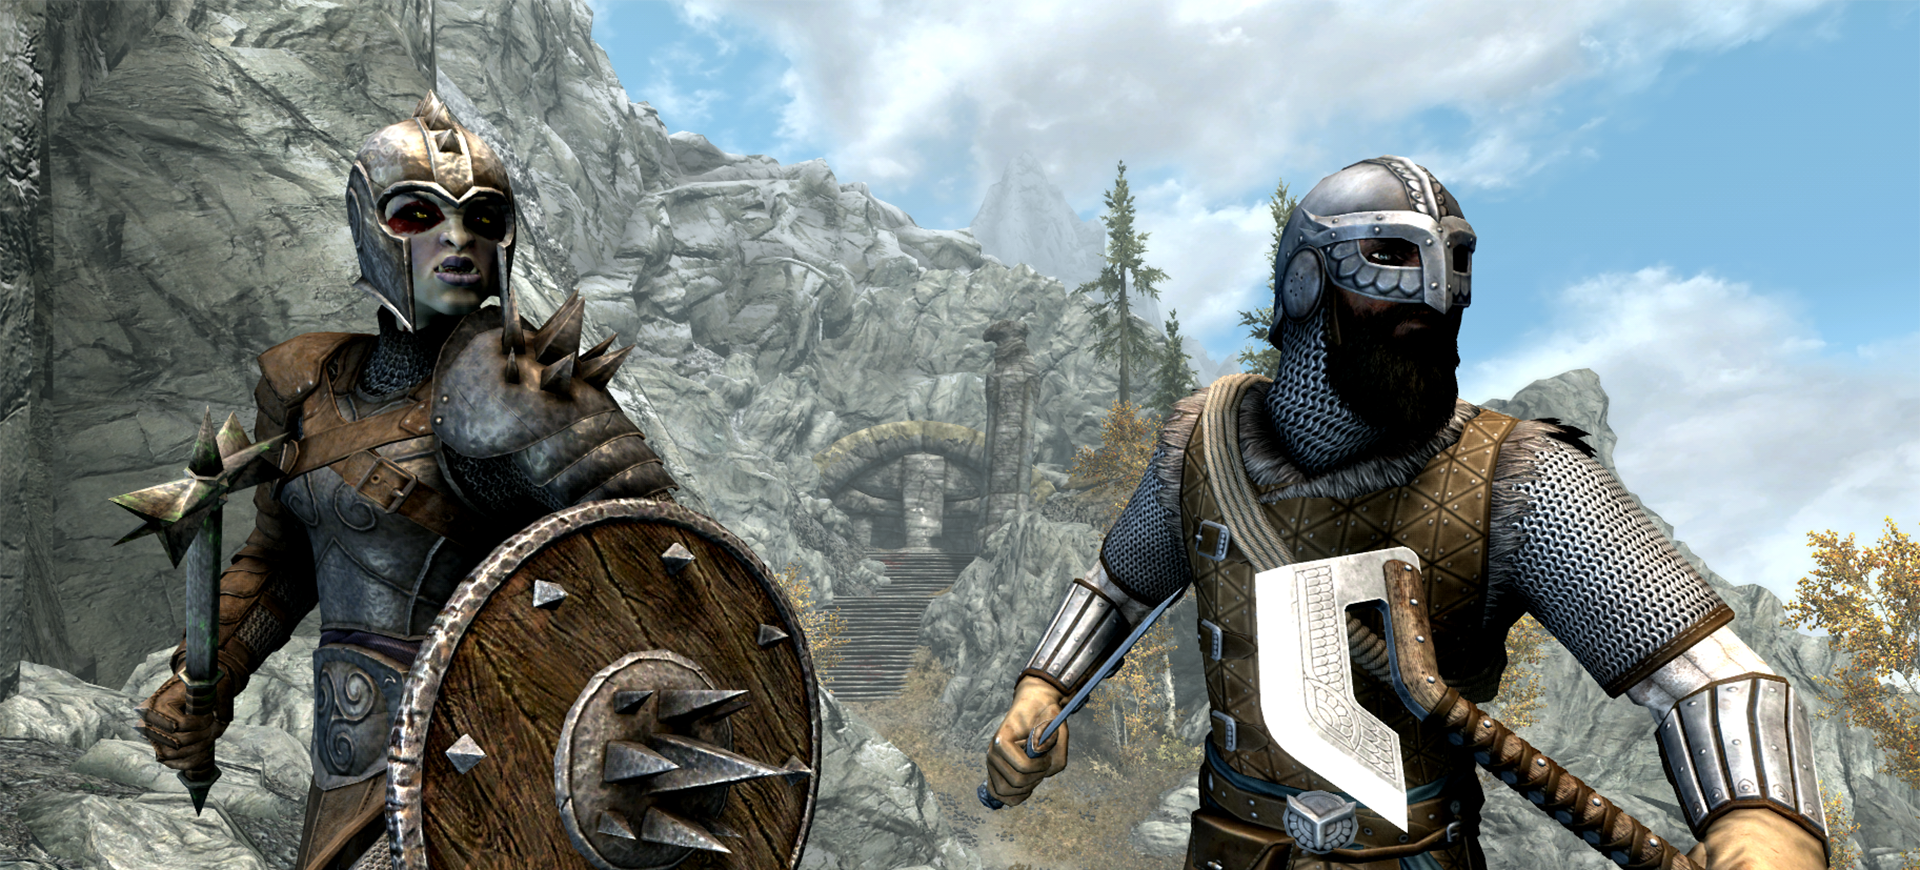 skyrim mods in special edition